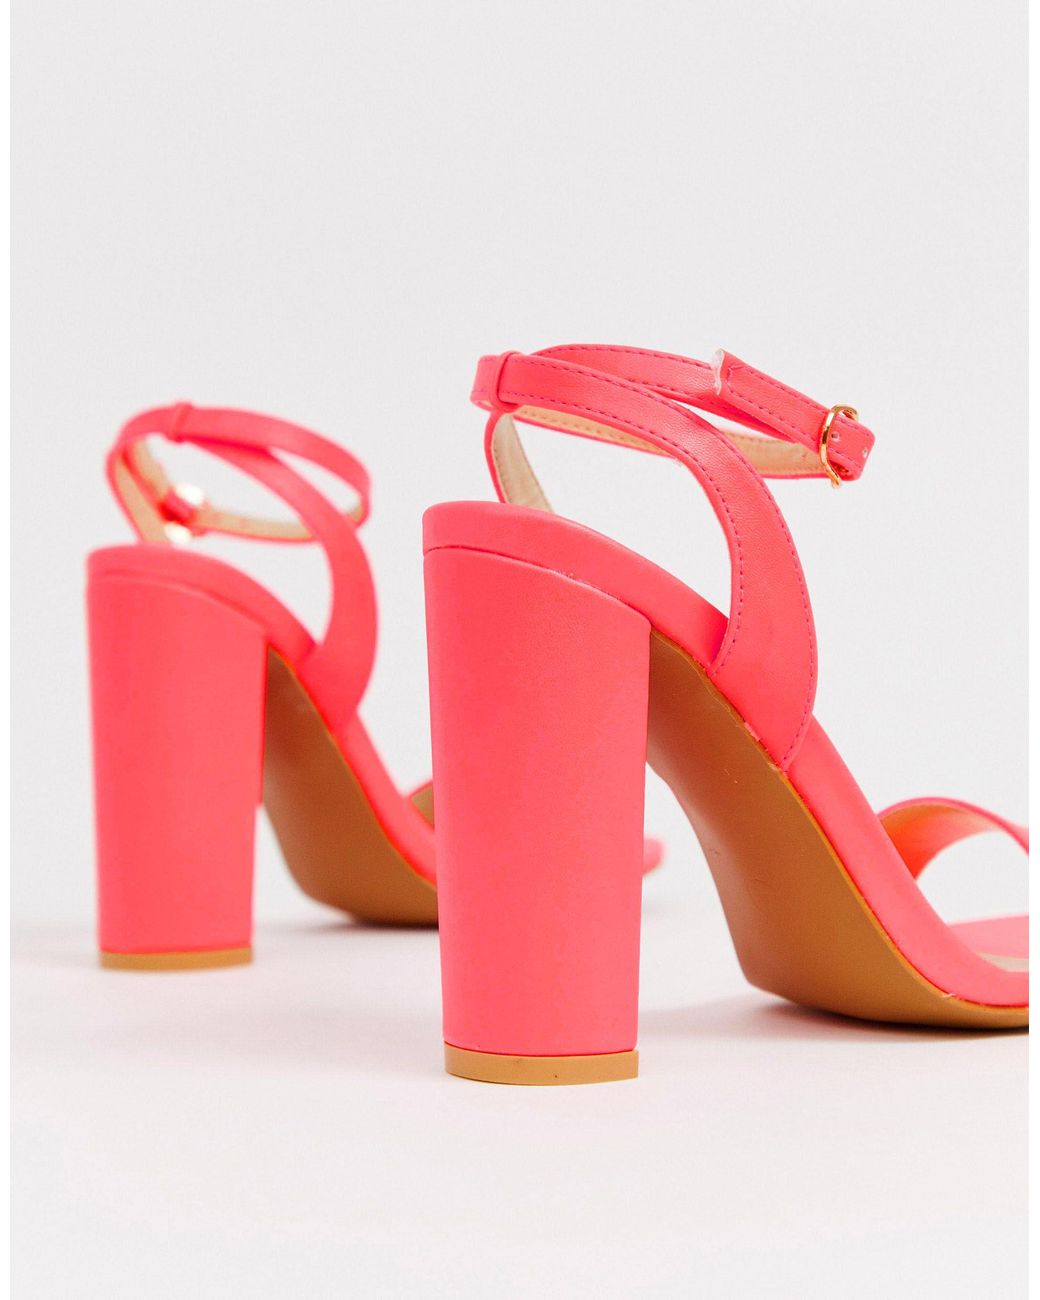 neon barely there heels